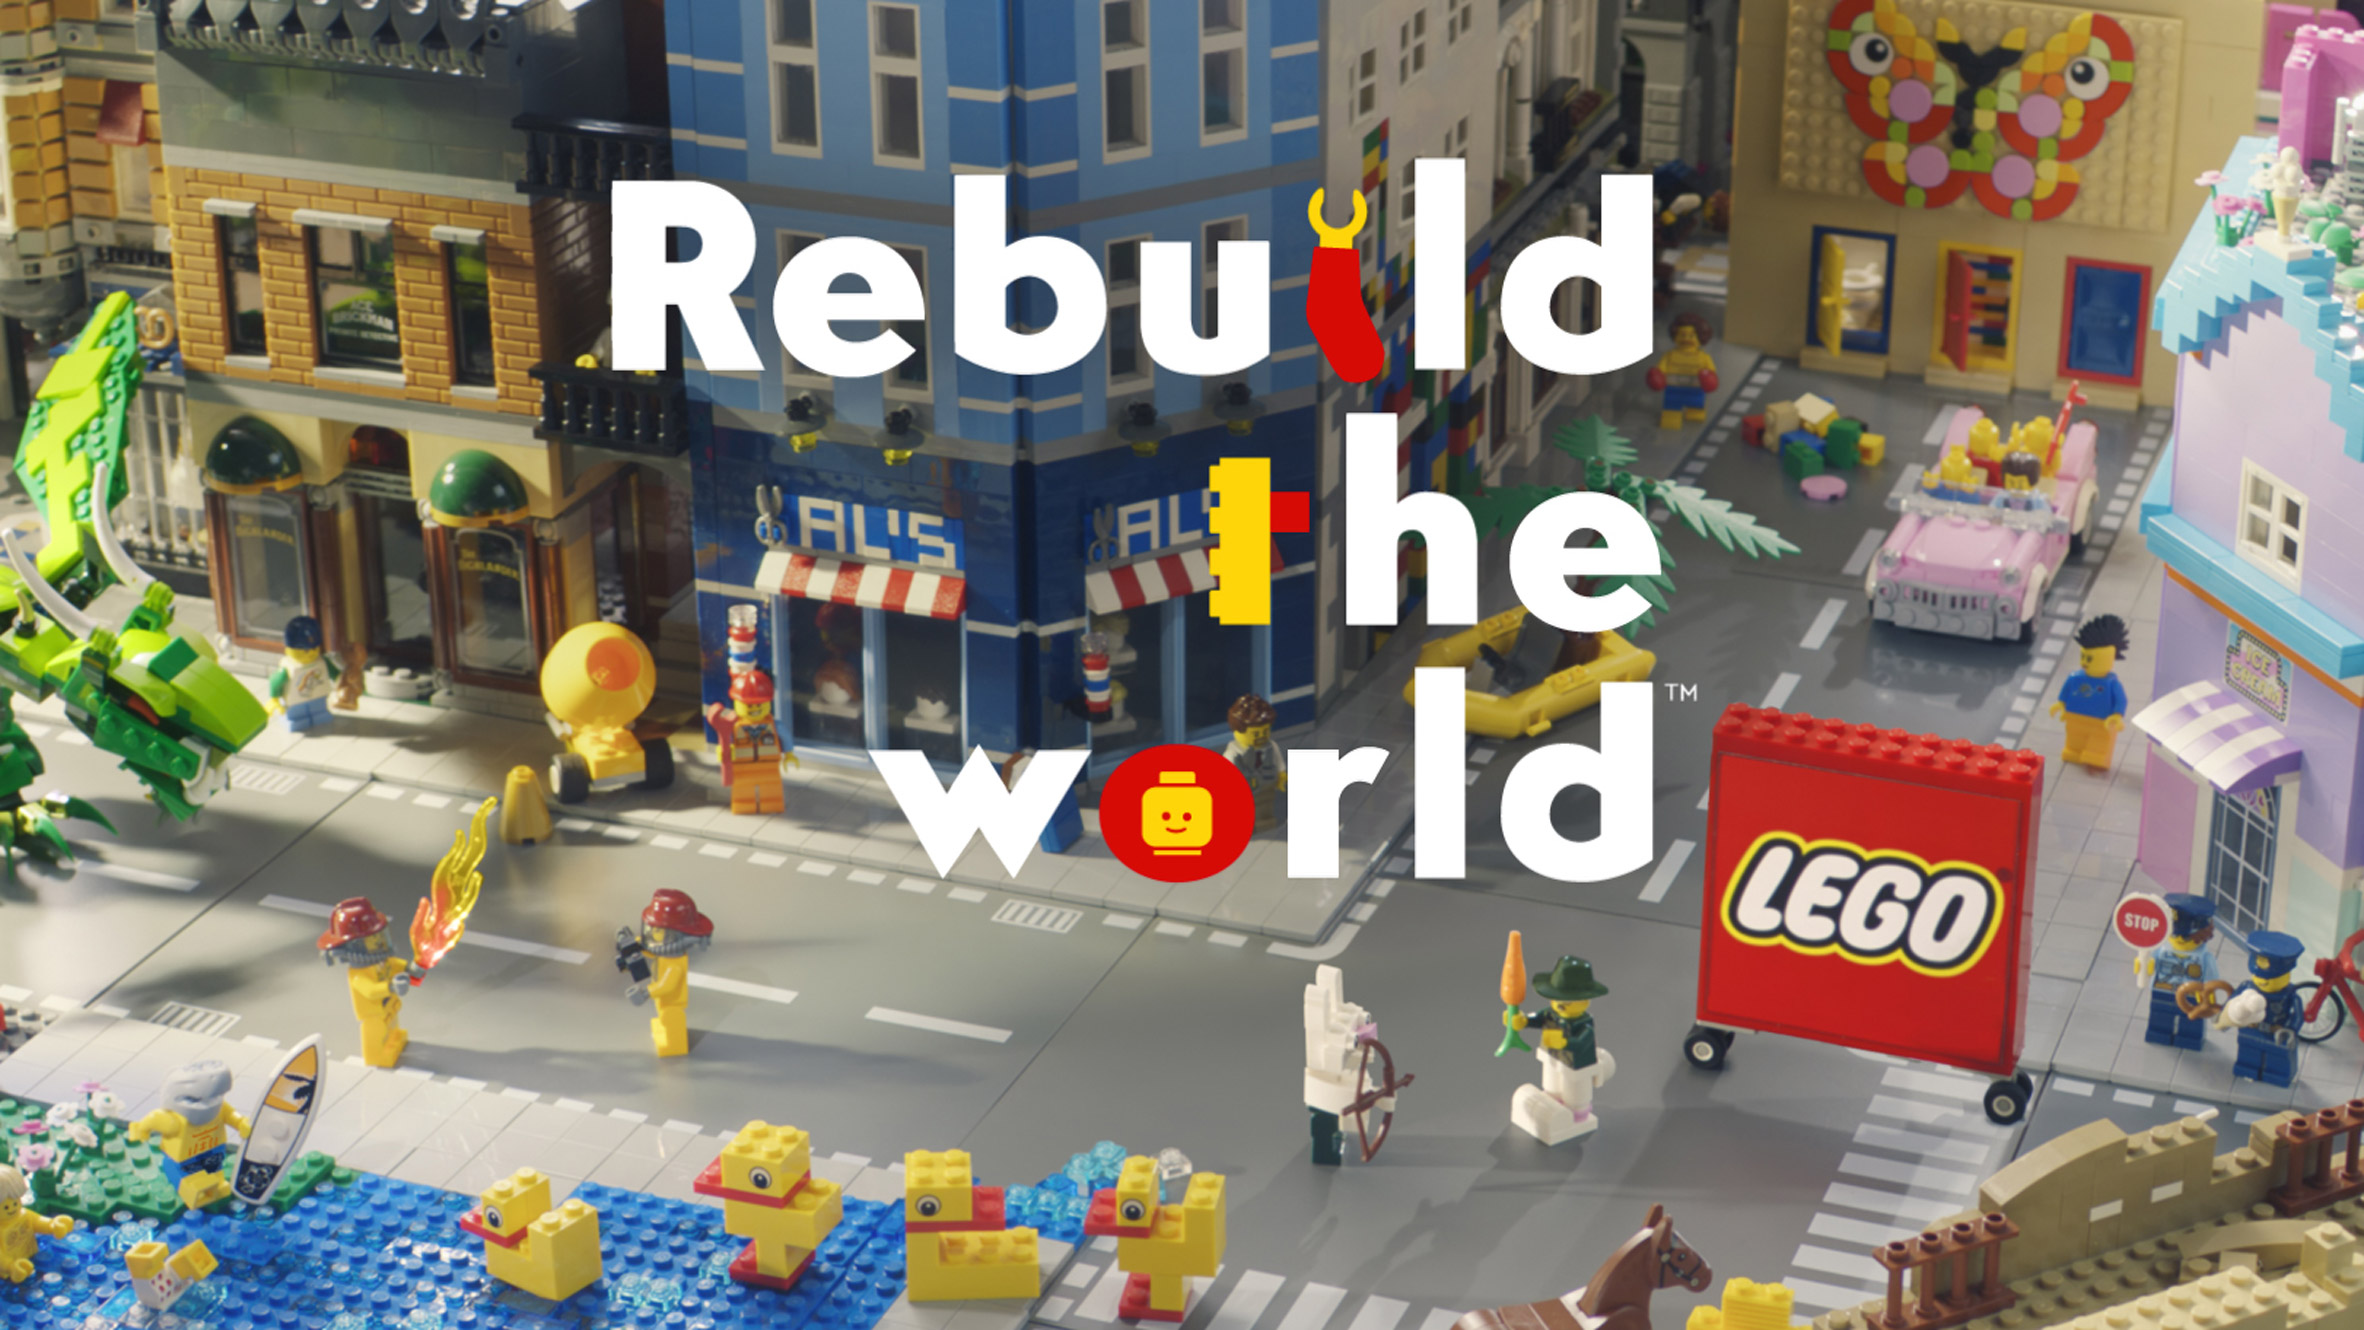 etc blod strubehoved Creativity is being "brushed aside" by digital media says Lego's head of  design